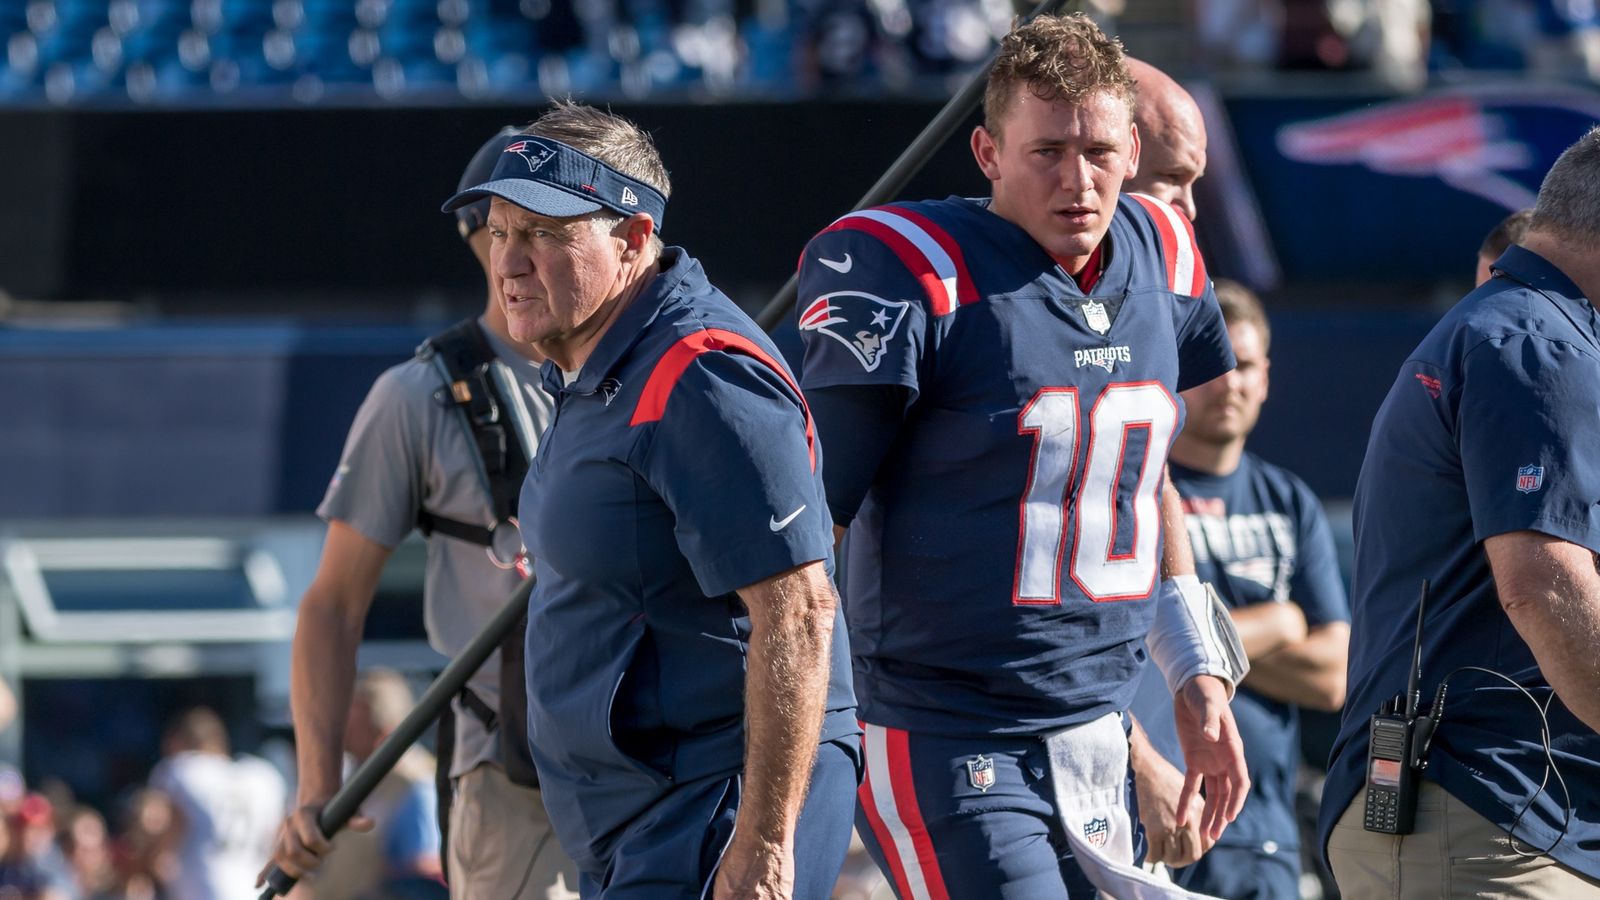 Patriots Bill Belichick Refuses to Get Hands 'Dirty' With Maligned QB Mac Jones - Sports Illustrated